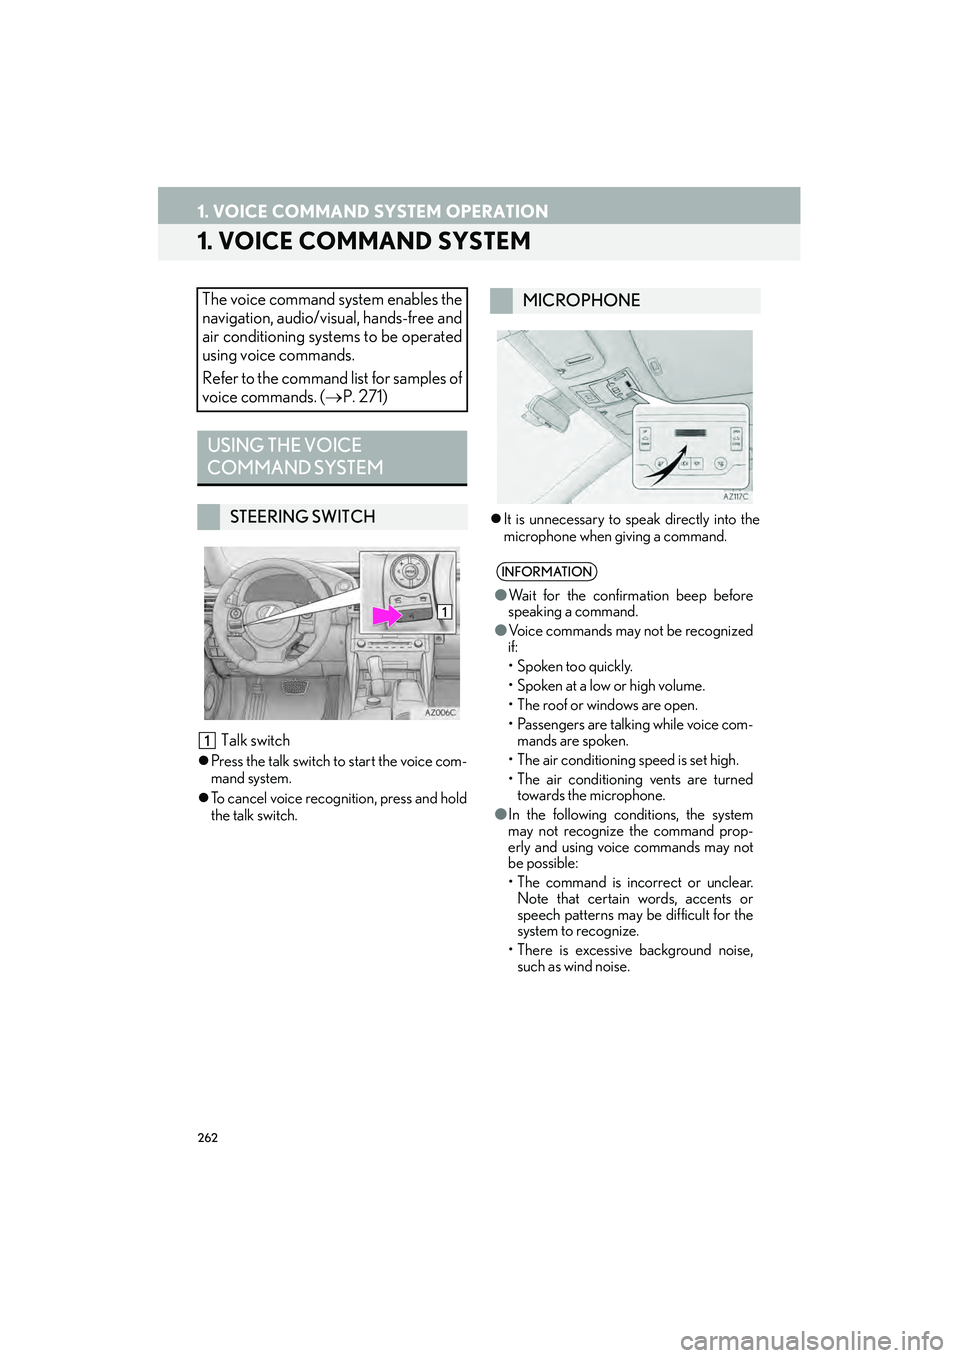 Lexus IS250 2015  Navigation Manual 262
IS250/350_Navi_U
1. VOICE COMMAND SYSTEM OPERATION
1. VOICE COMMAND SYSTEM
 Talk switch
�zPress the talk switch to start the voice com-
mand system.
�z To cancel voice recognition, press and hold
